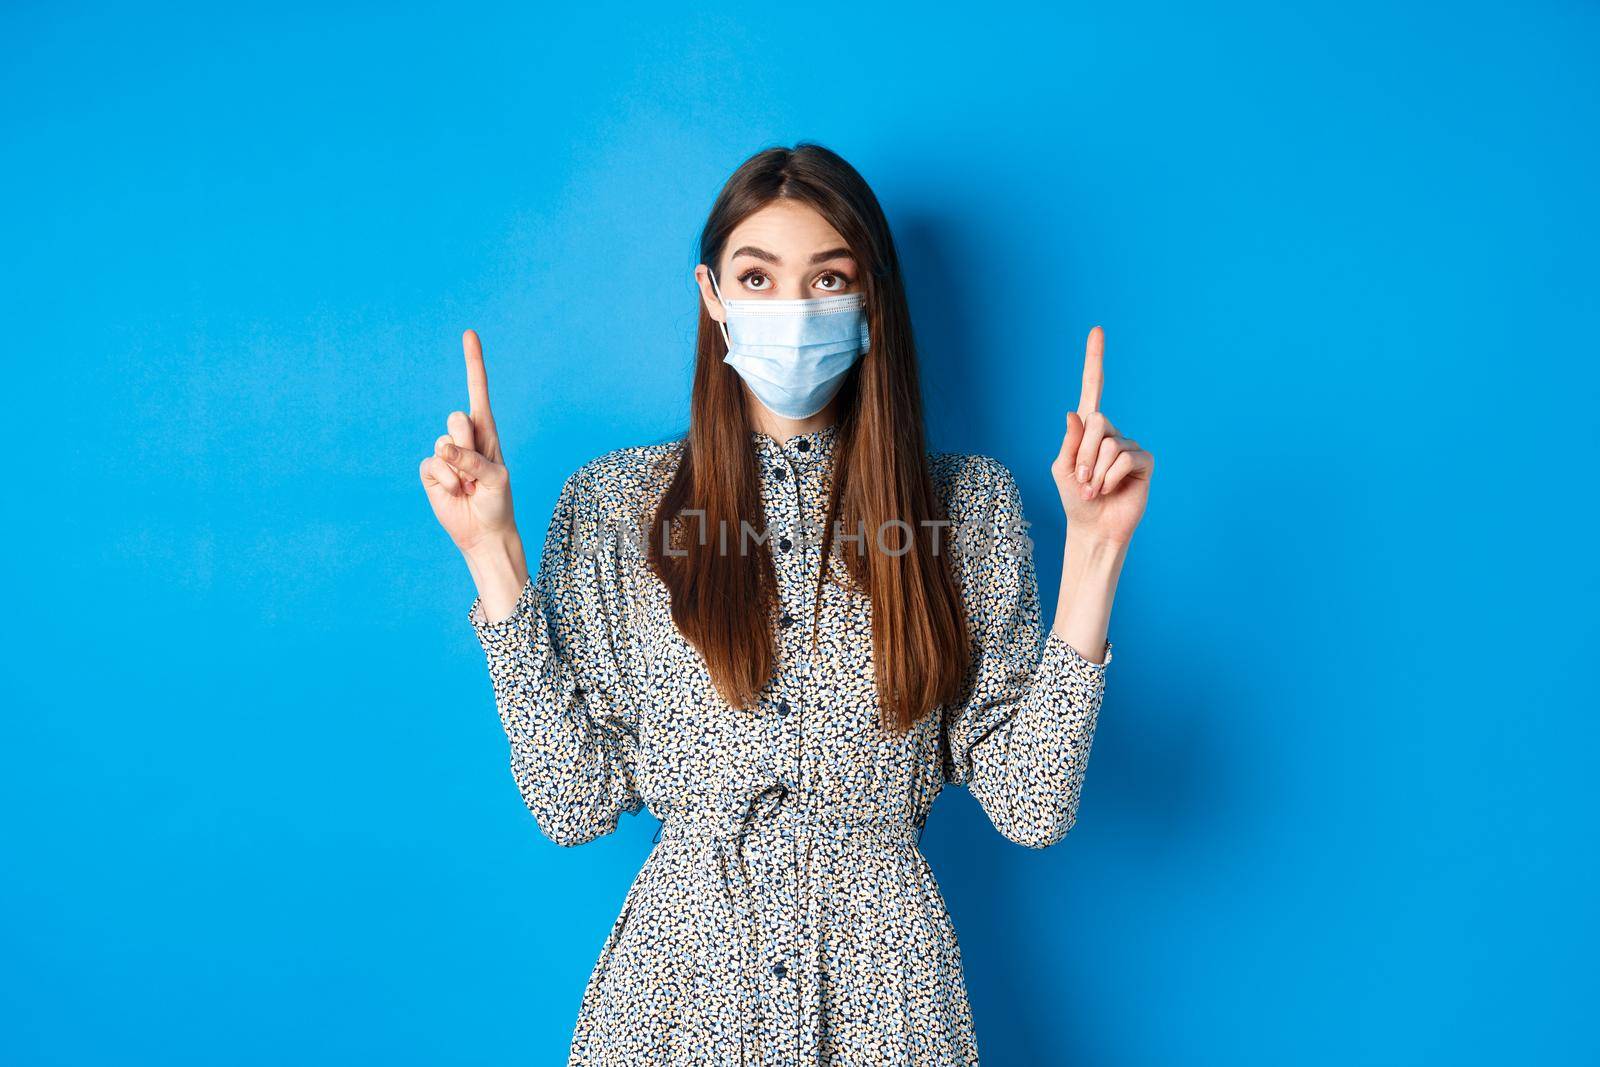 People, covid and quarantine concept. Intrigued young woman looking and pointing up at advertisement, standing in dress and face mask from coronavirus, blue background.